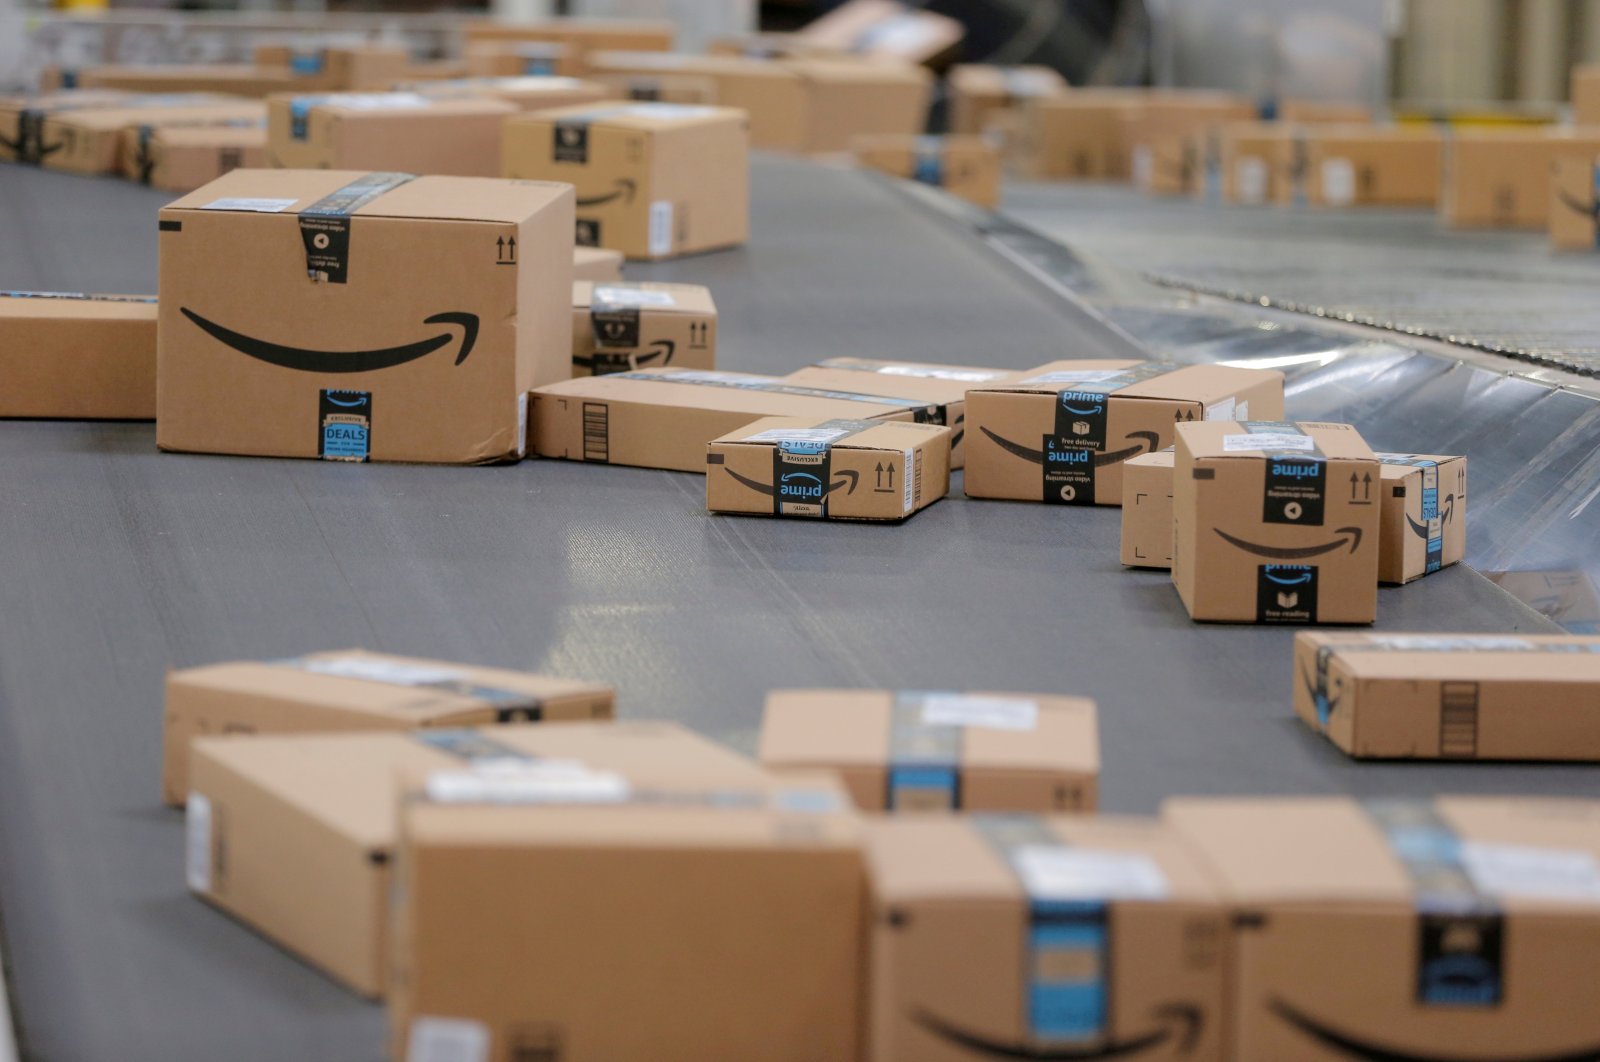 Packages emblazoned with Amazon logos travel along a conveyor belt inside of an Amazon fulfillment center in Robbinsville, New Jersey, U.S., Nov. 27, 2017. (Reuters Photo)